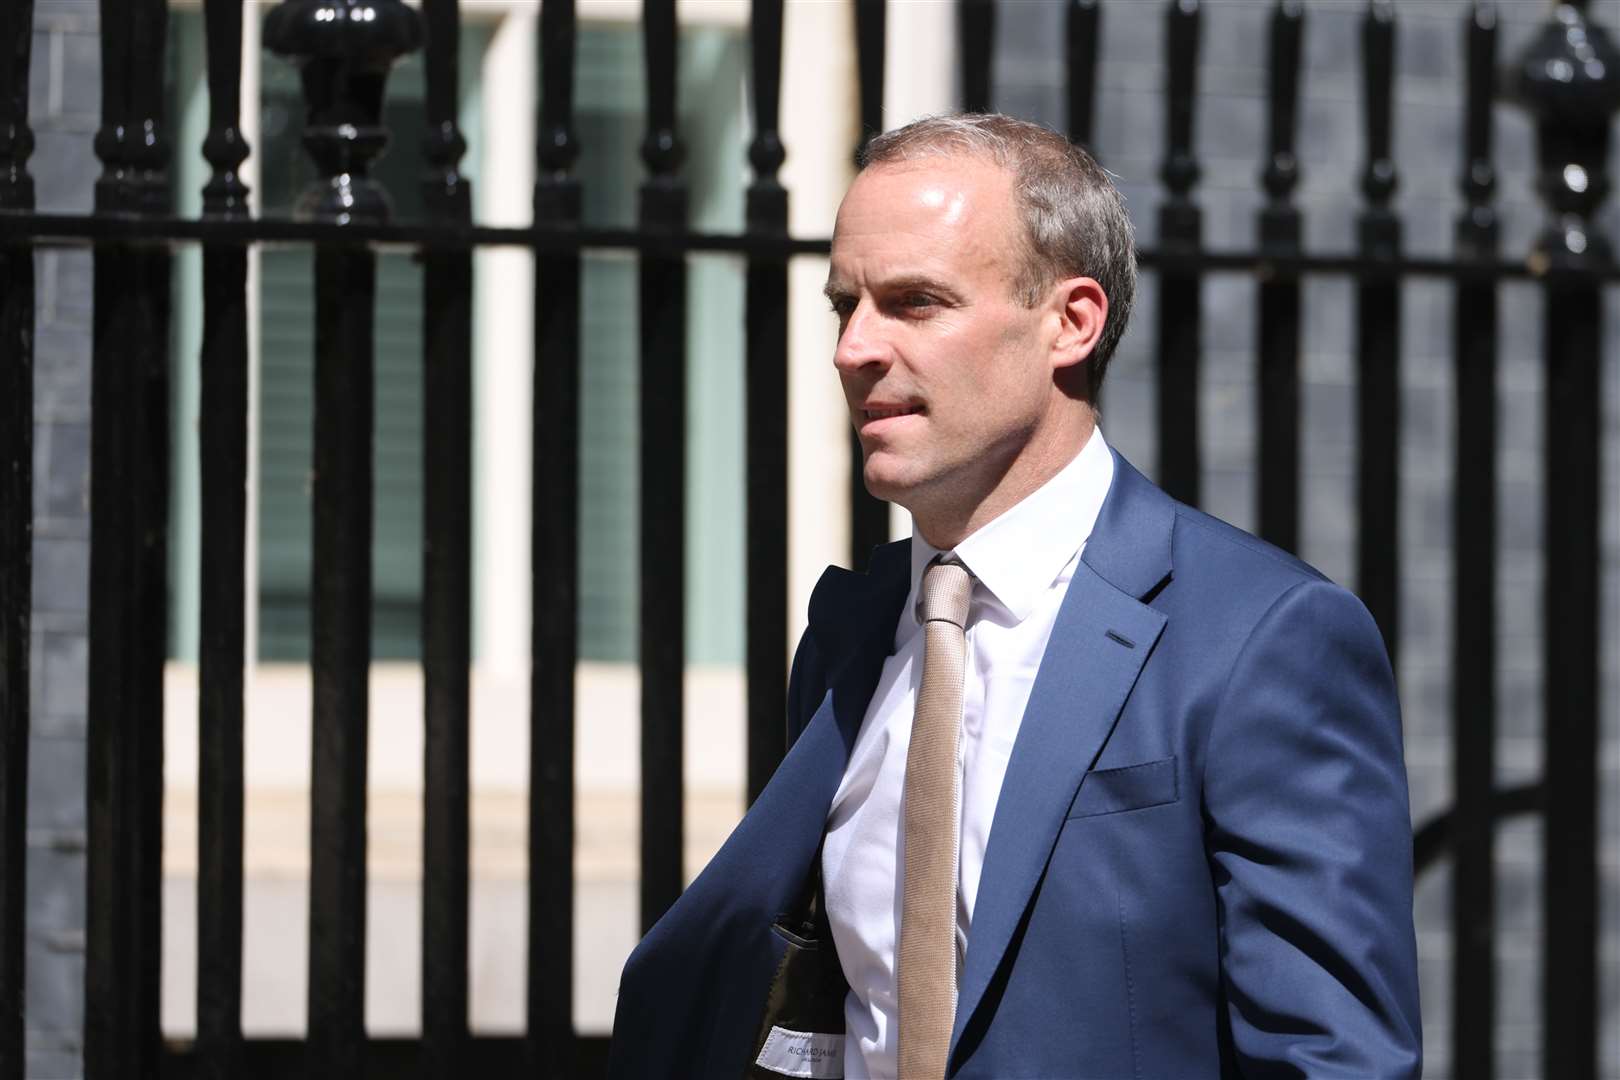 Mr Raab arrives for a cabinet meeting at 10 Downing Street, London (James Manning/PA)